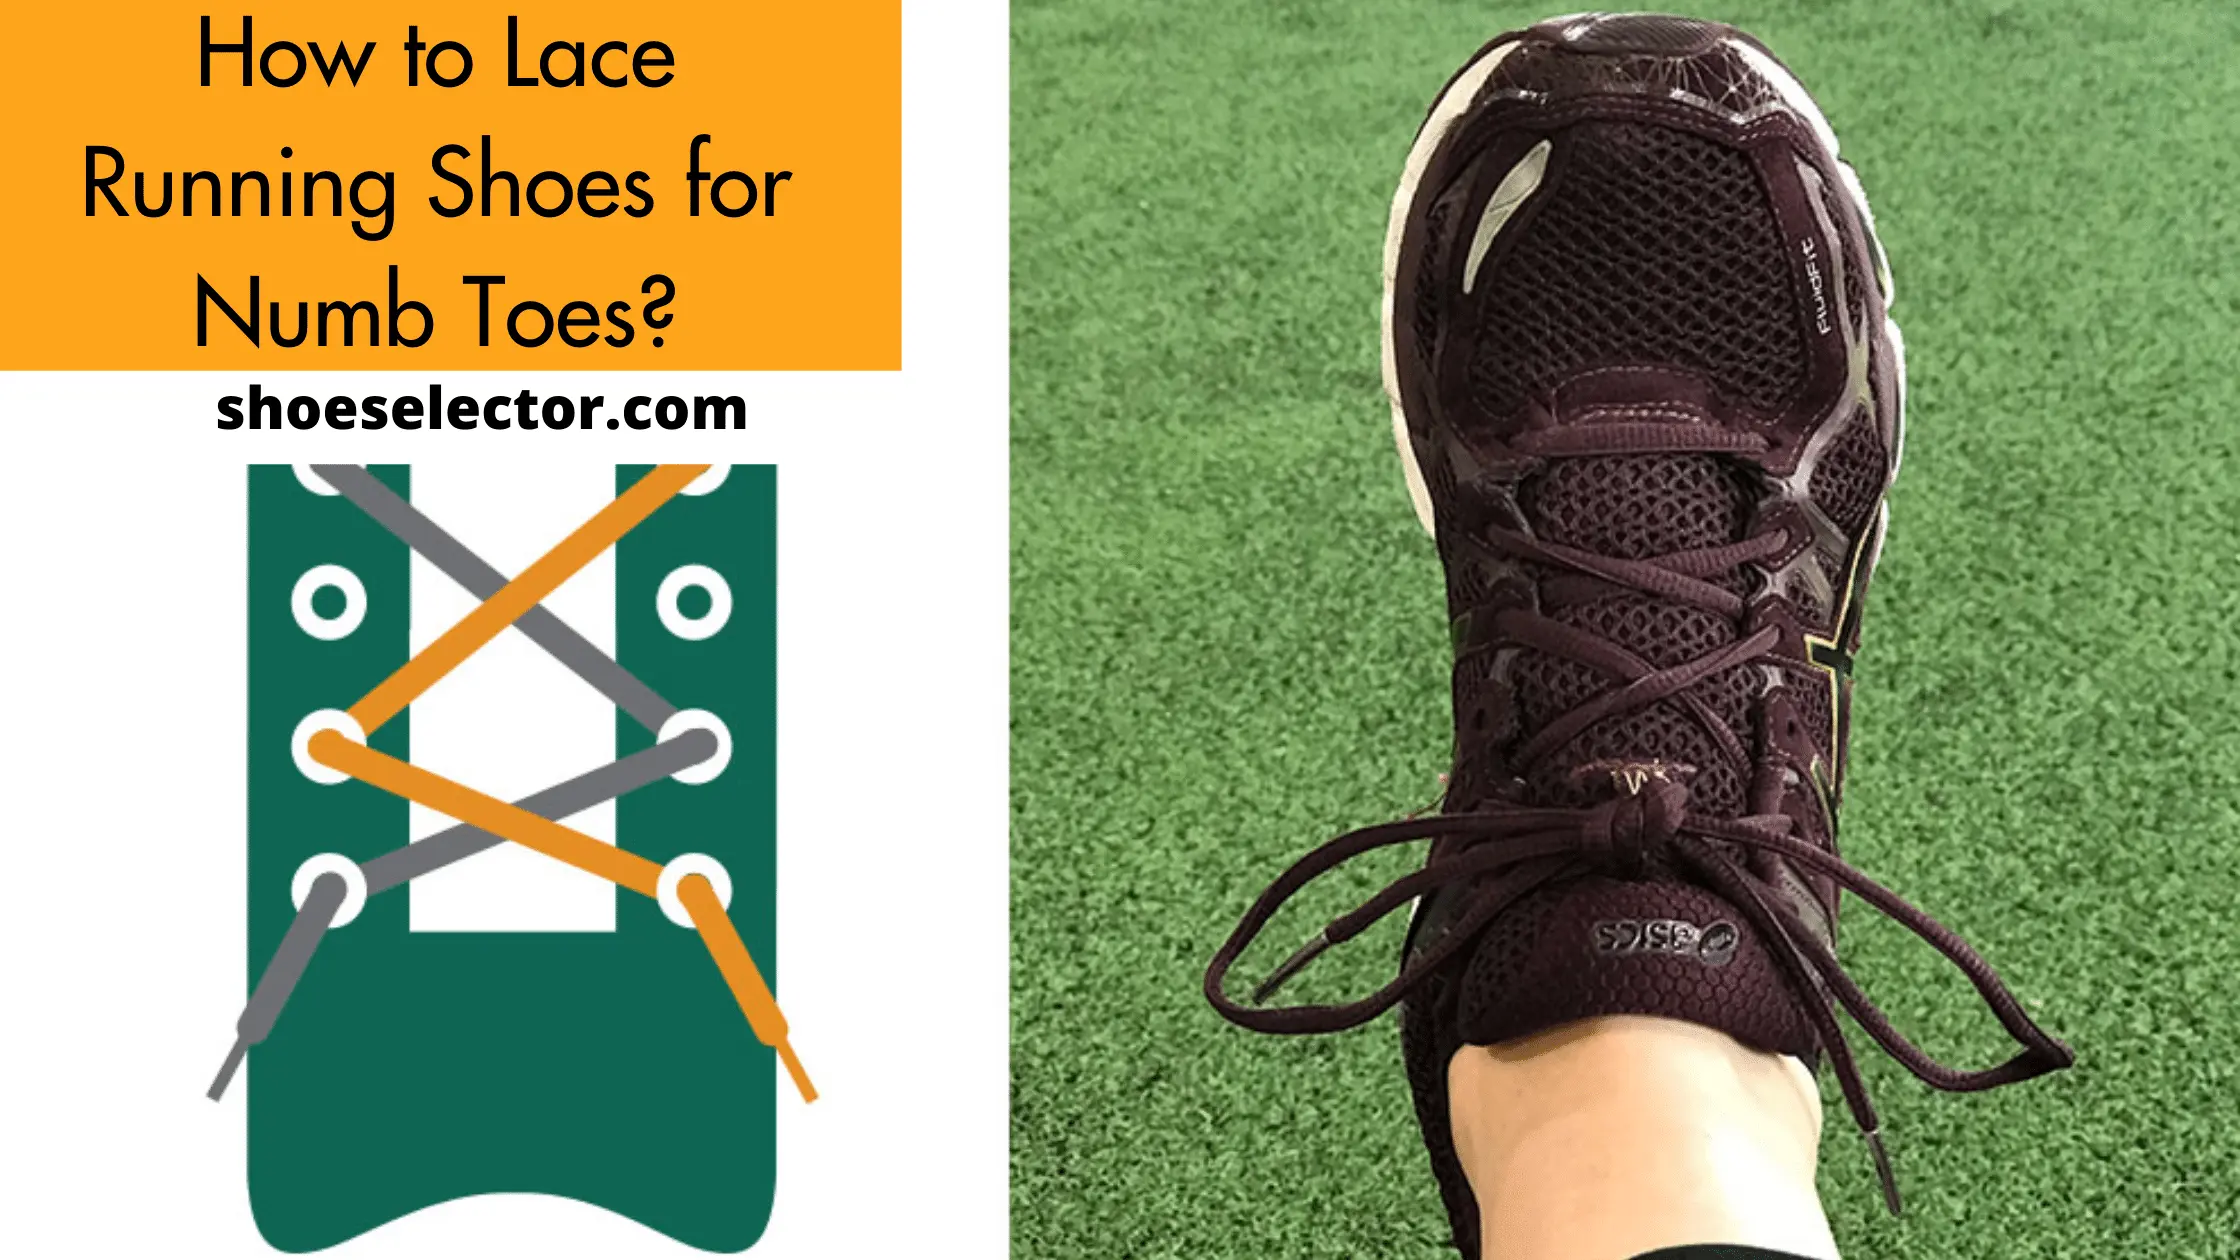 How to Lace Running Shoes for Numb Toes? Explore and Learn